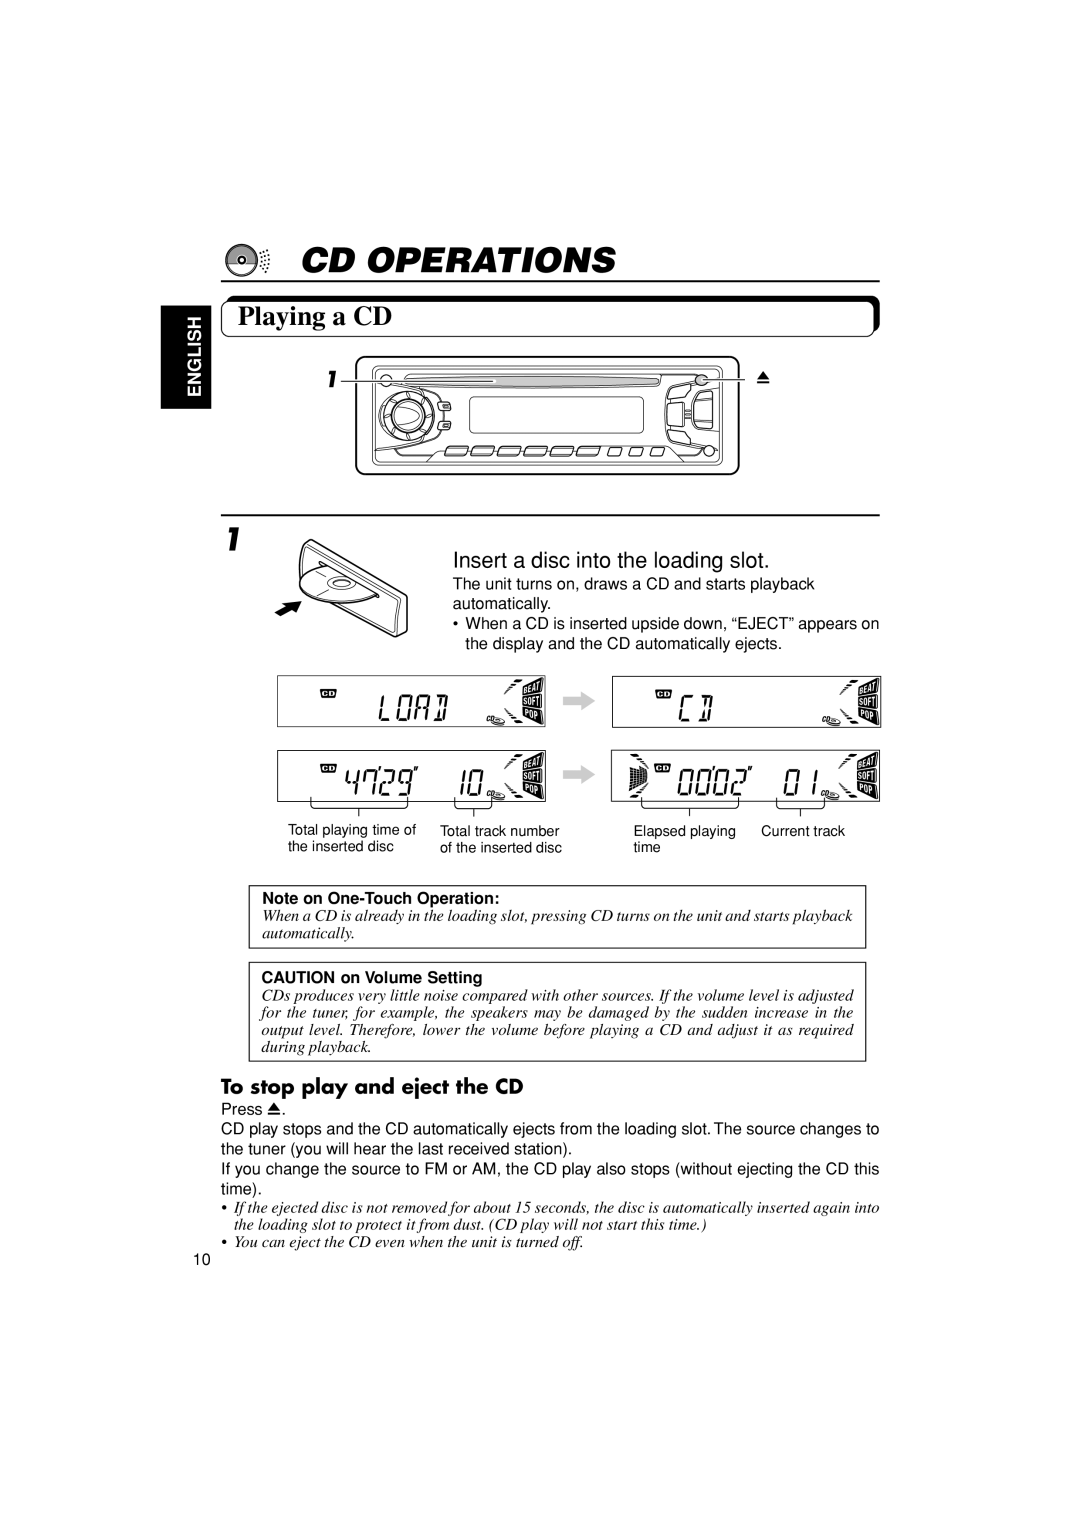 JVC KD-S670 manual Cd Operations, Playing a CD, Insert a disc into the loading slot, To stop play and eject the CD, English 